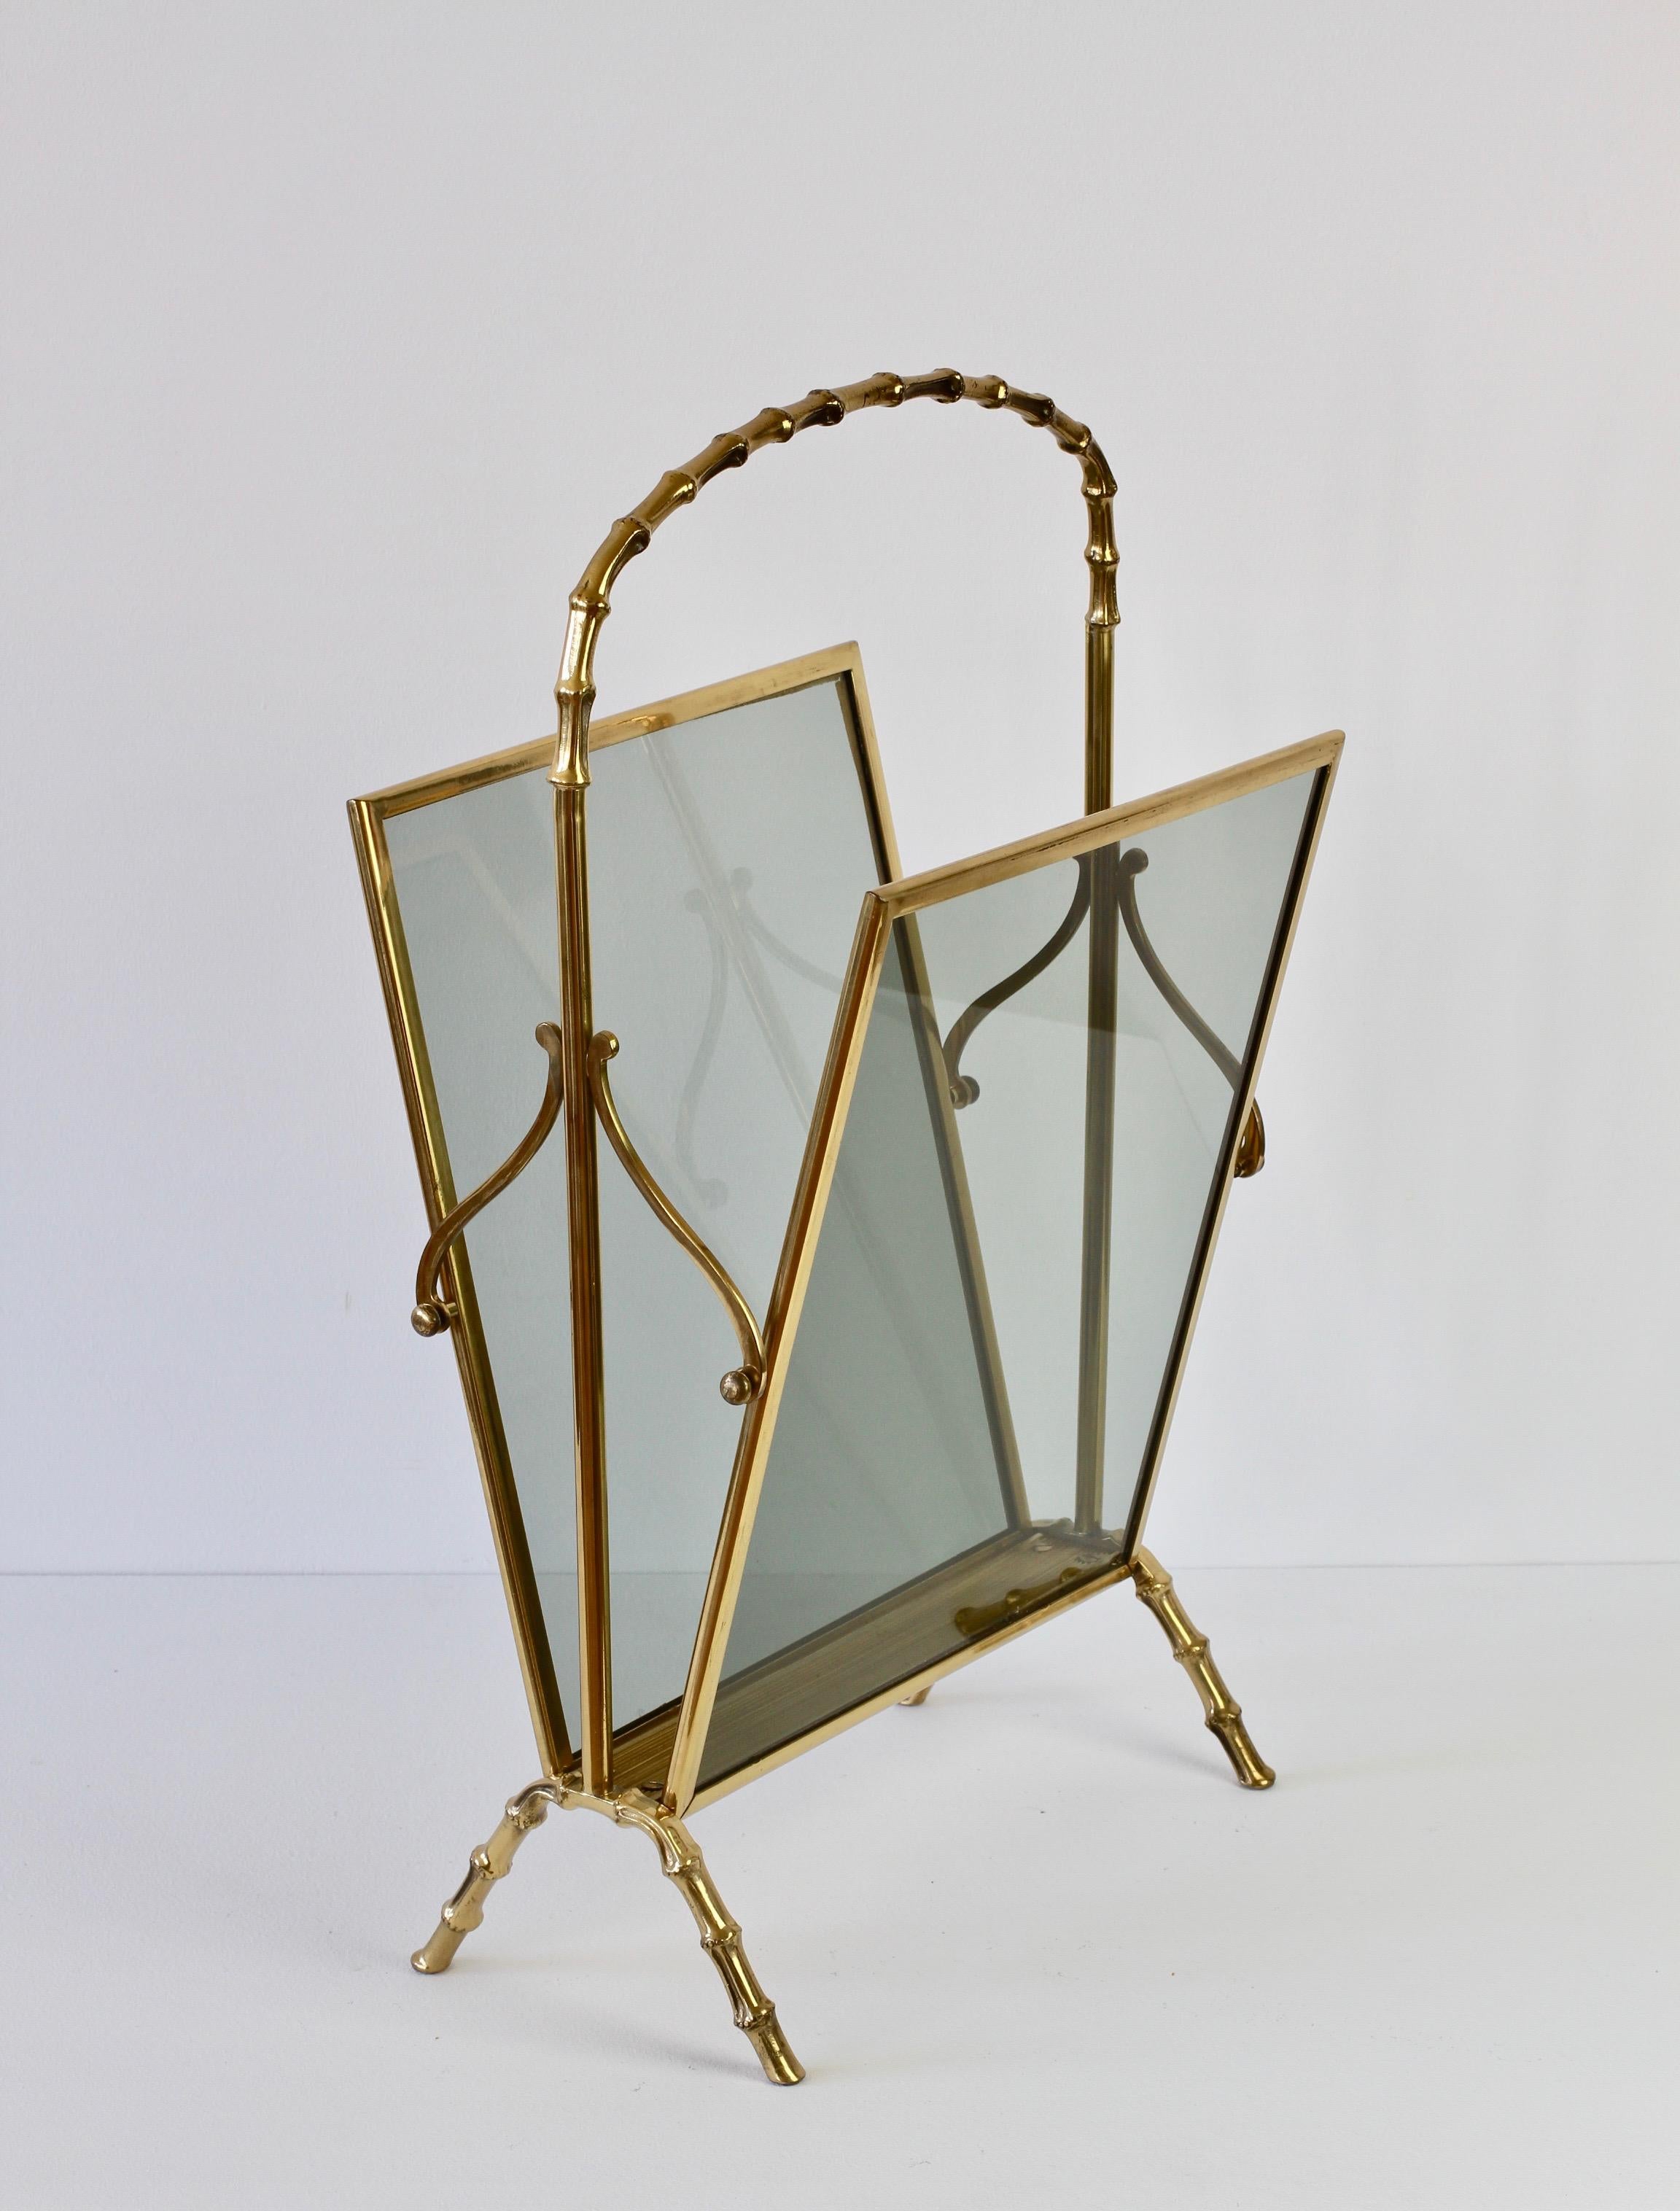 20th Century Maison Baguès attr. Cast Brass Faux Bamboo Magazine Rack or Newspaper Stand